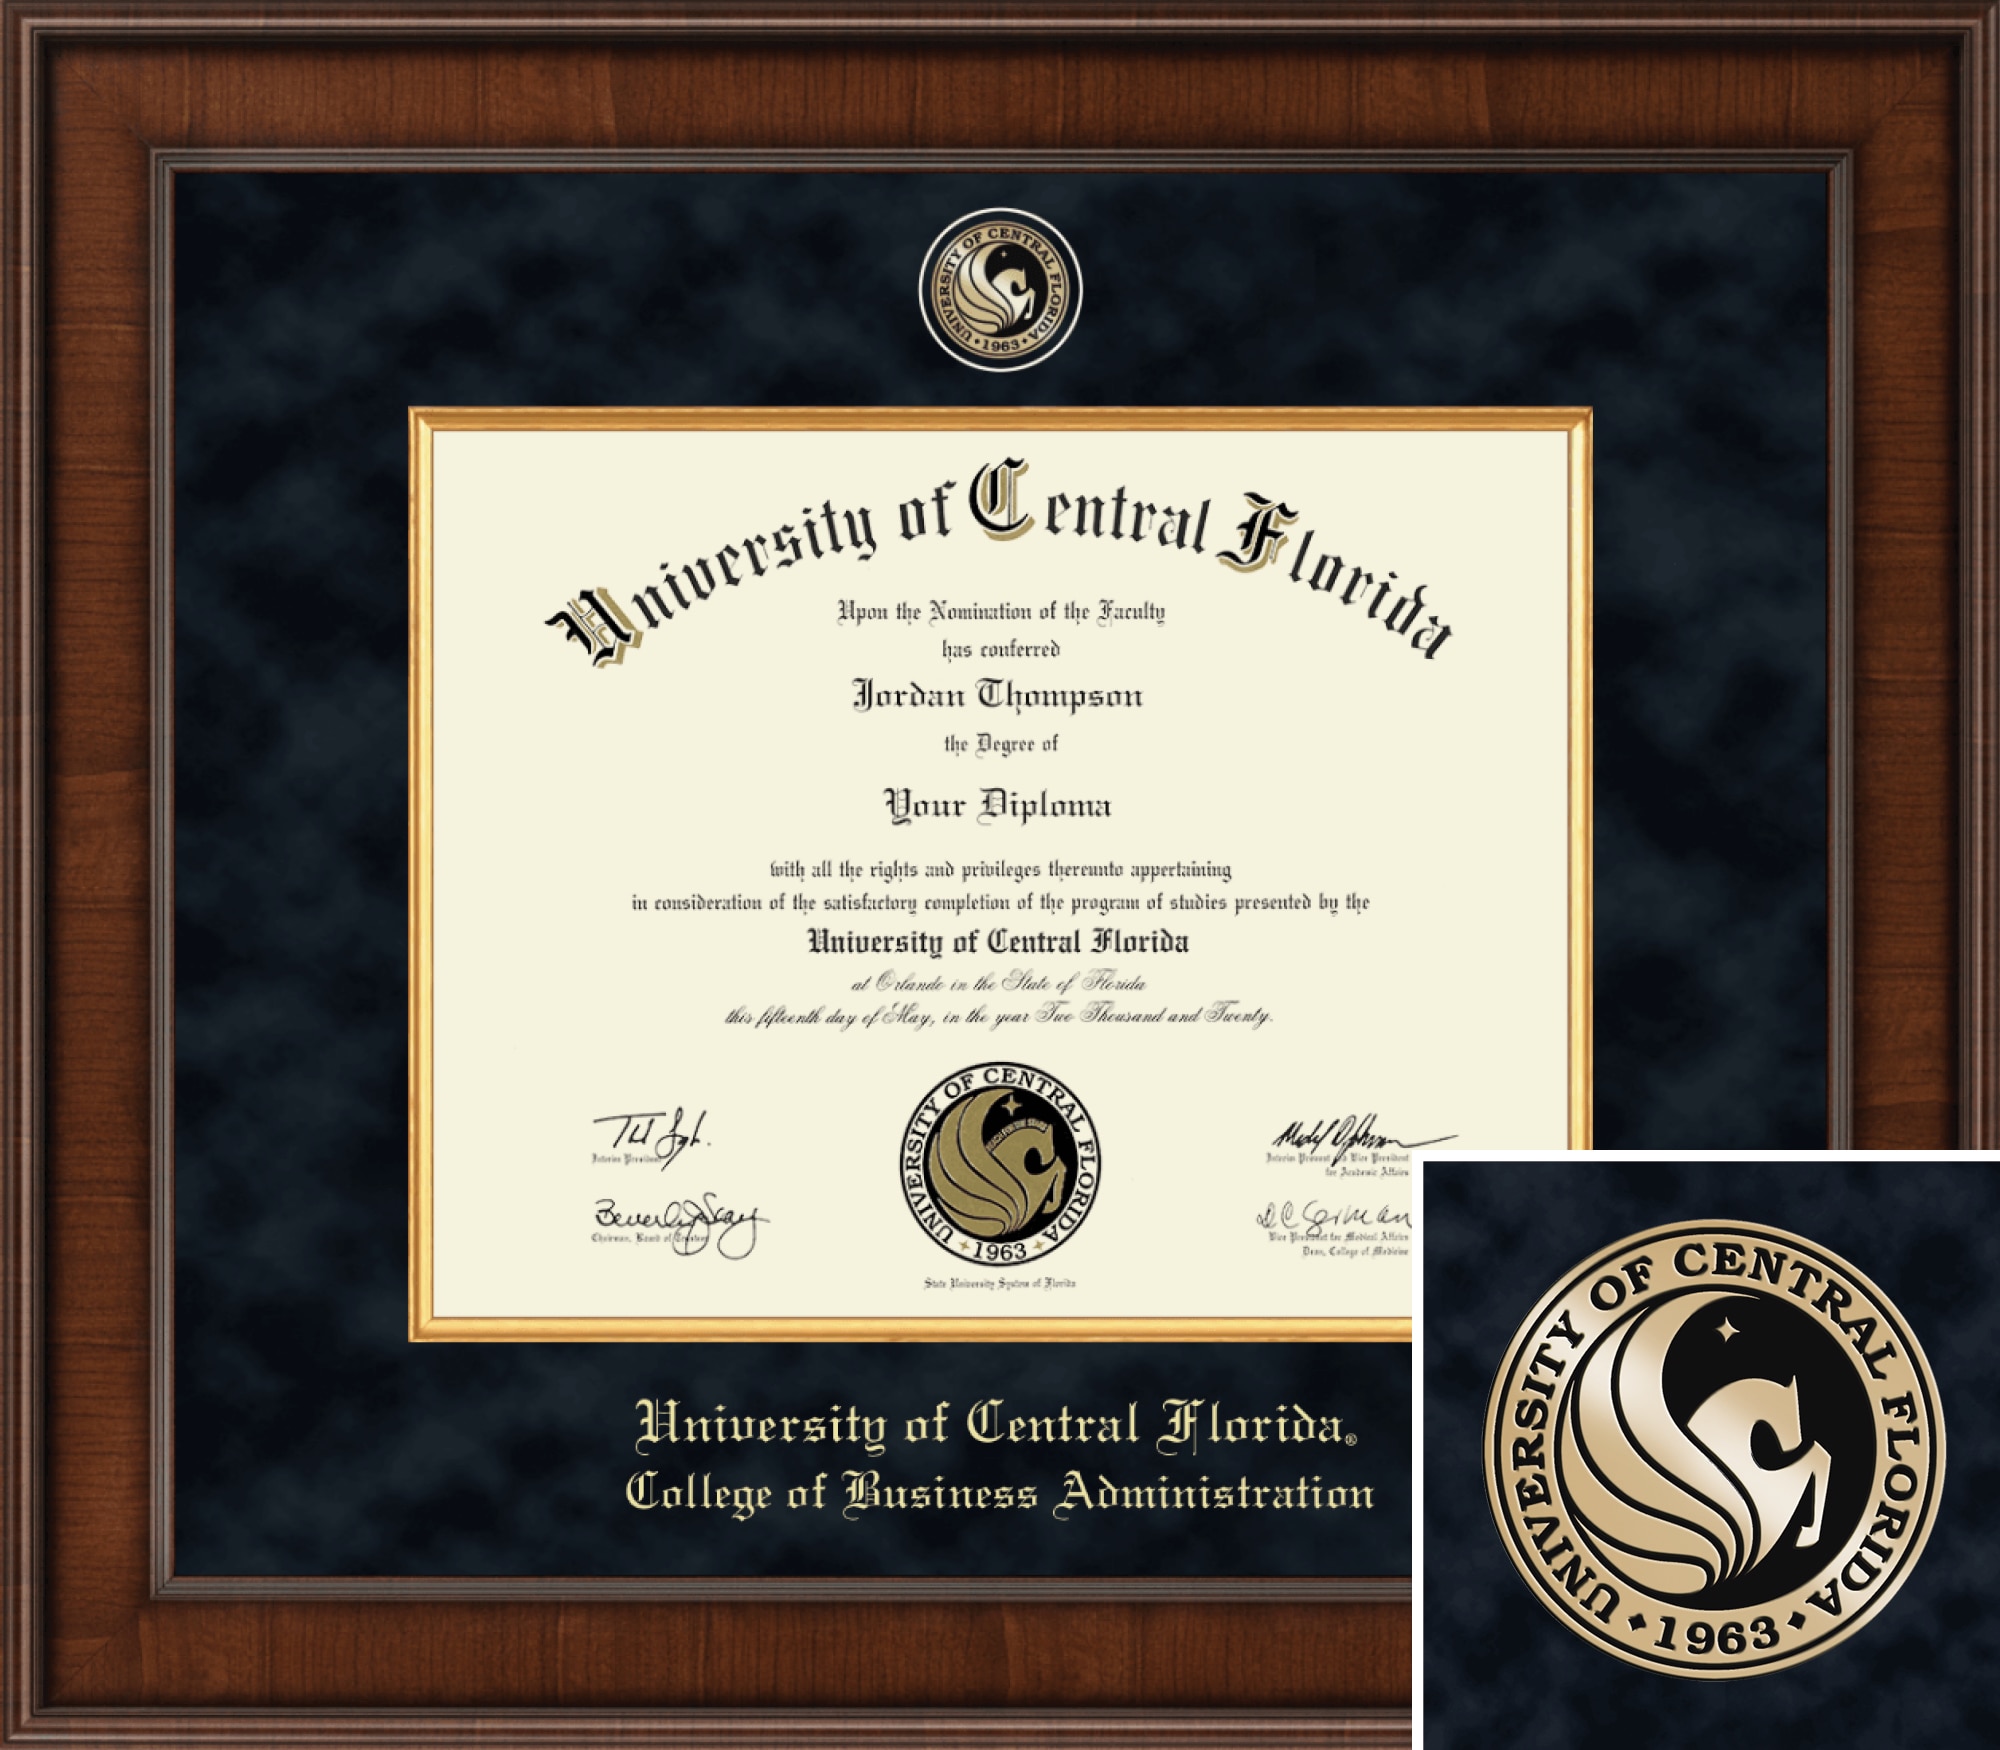 Church Hill Classics 11" x 14" Presidential Walnut College of Business Administration Diploma Frame